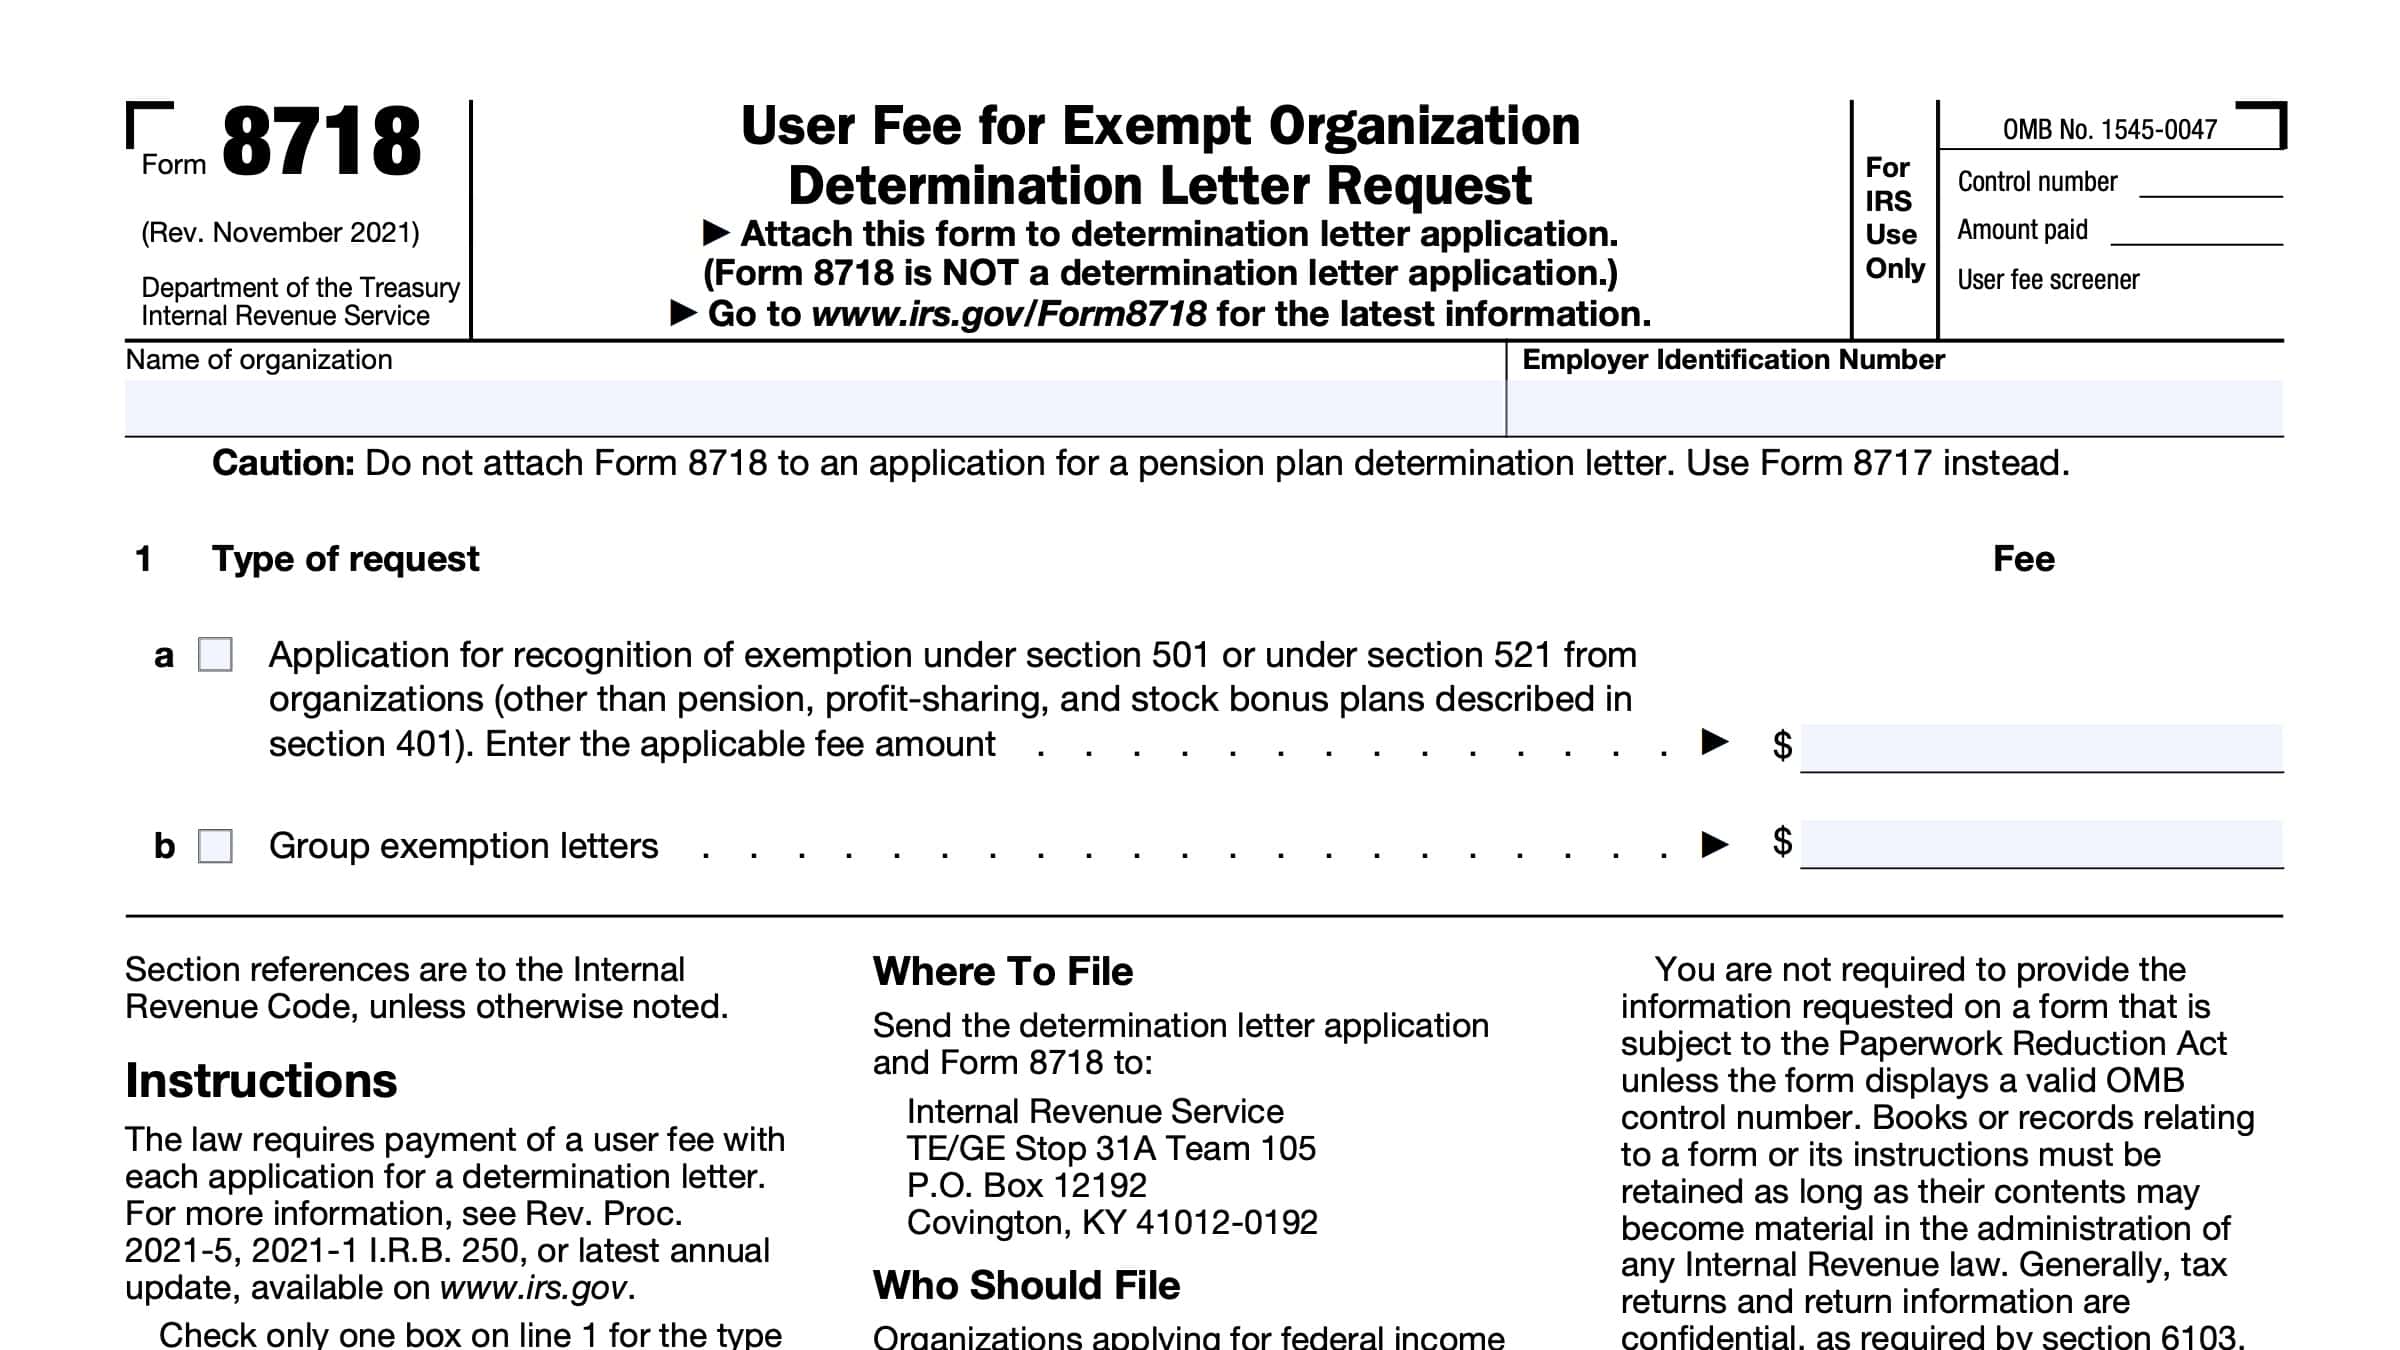 irs form 8718, user fee for exempt organization determination letter request